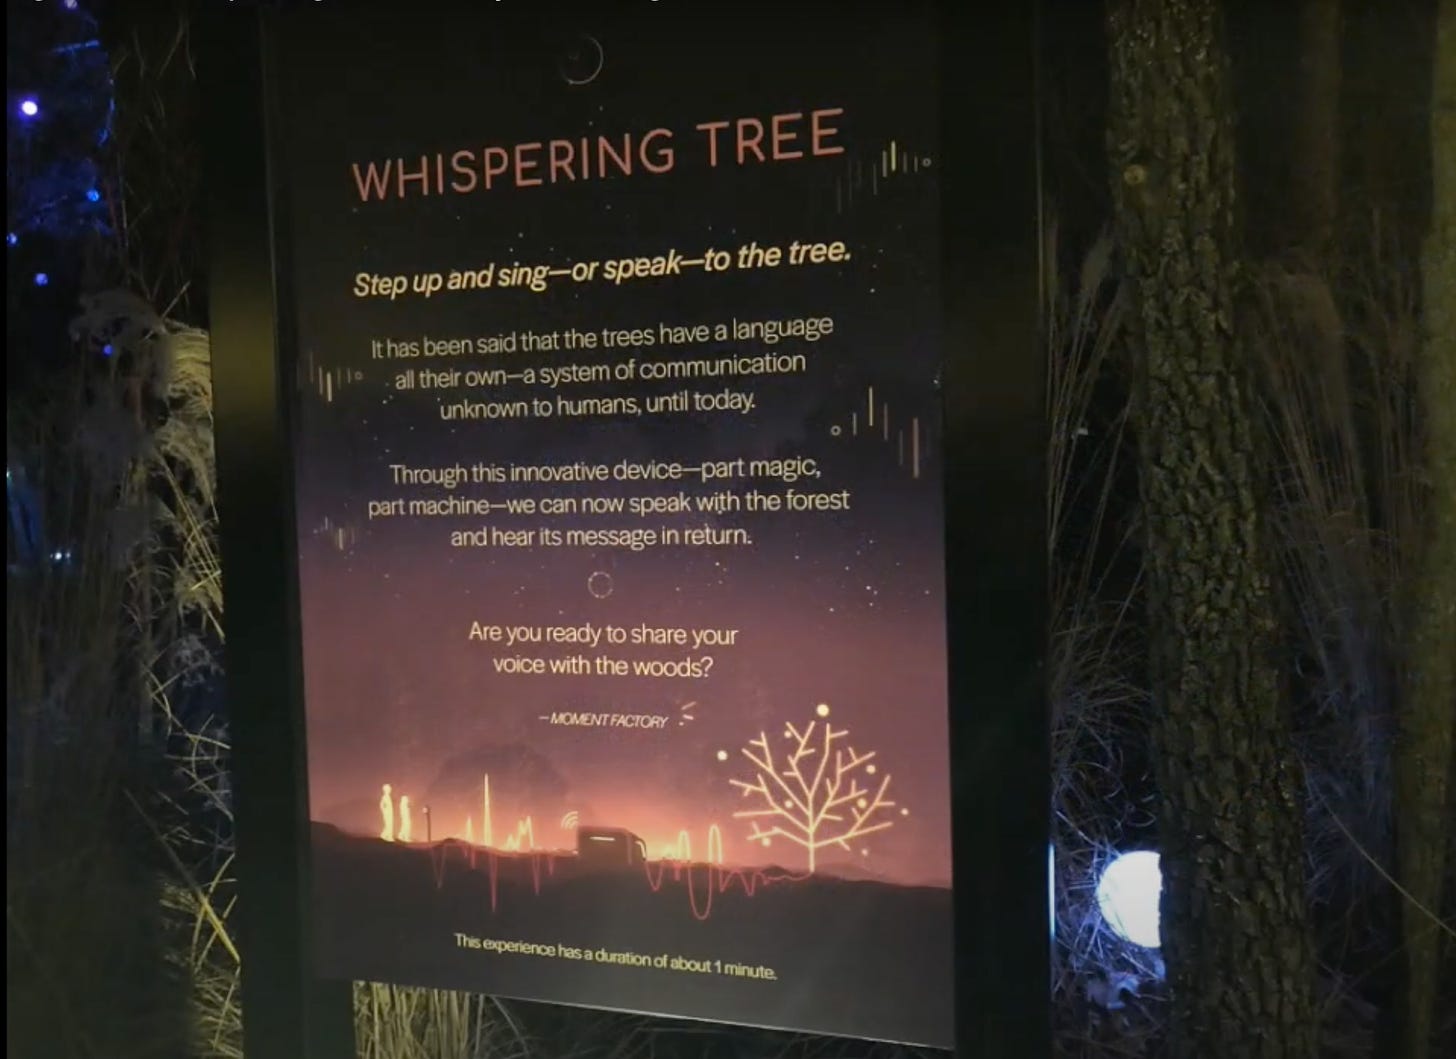 Whispering Tree: Step up and sing--or speak--to the tree. It has been said that the trees have a language all their own--a system of communication unknown to humans, until today. Through this innovative device--part magic, part machine--we can now speak with the forest and hear its message in return. Are you ready to share your voice with the woods? Moment Factory